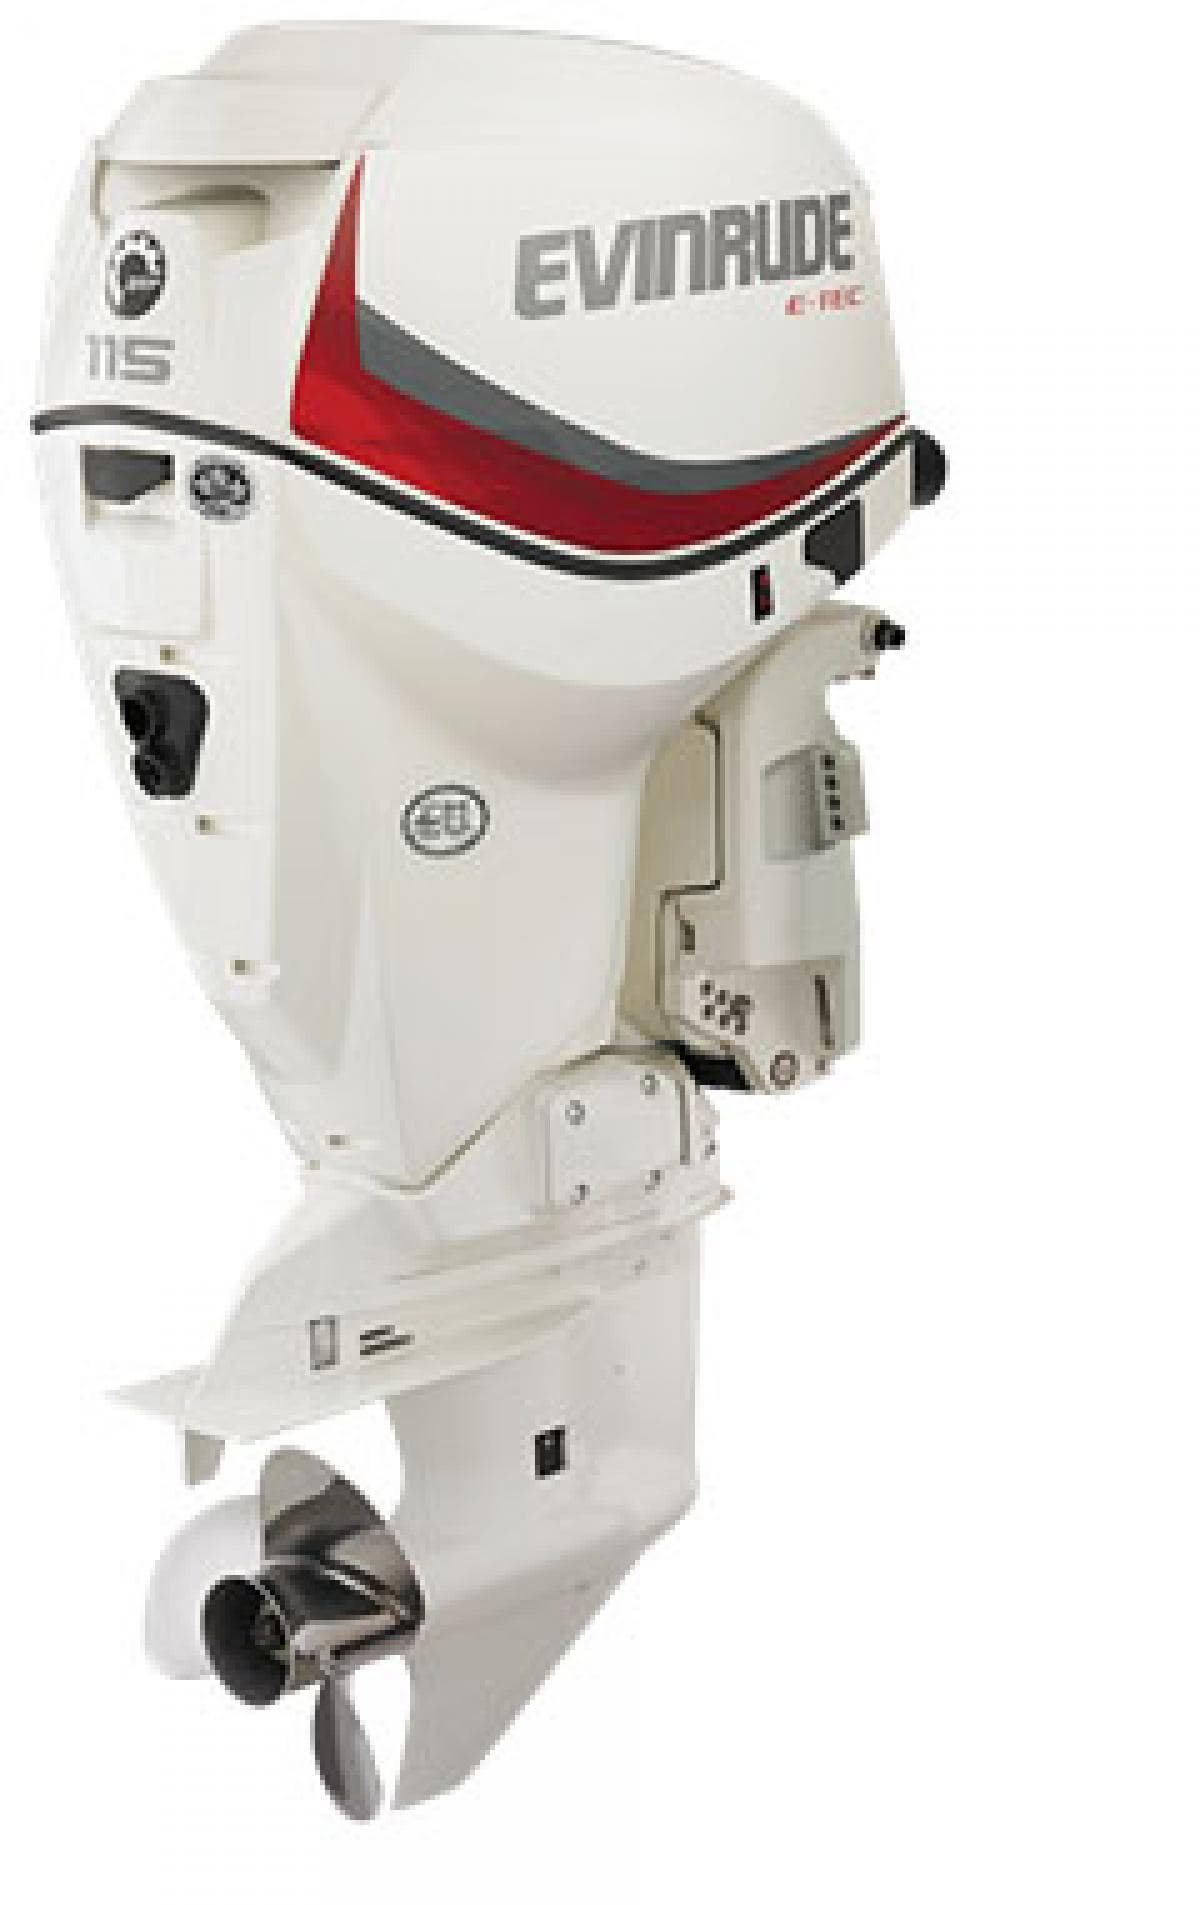 Evinrude Etec 115DSL Direct Injection Outboard Engine